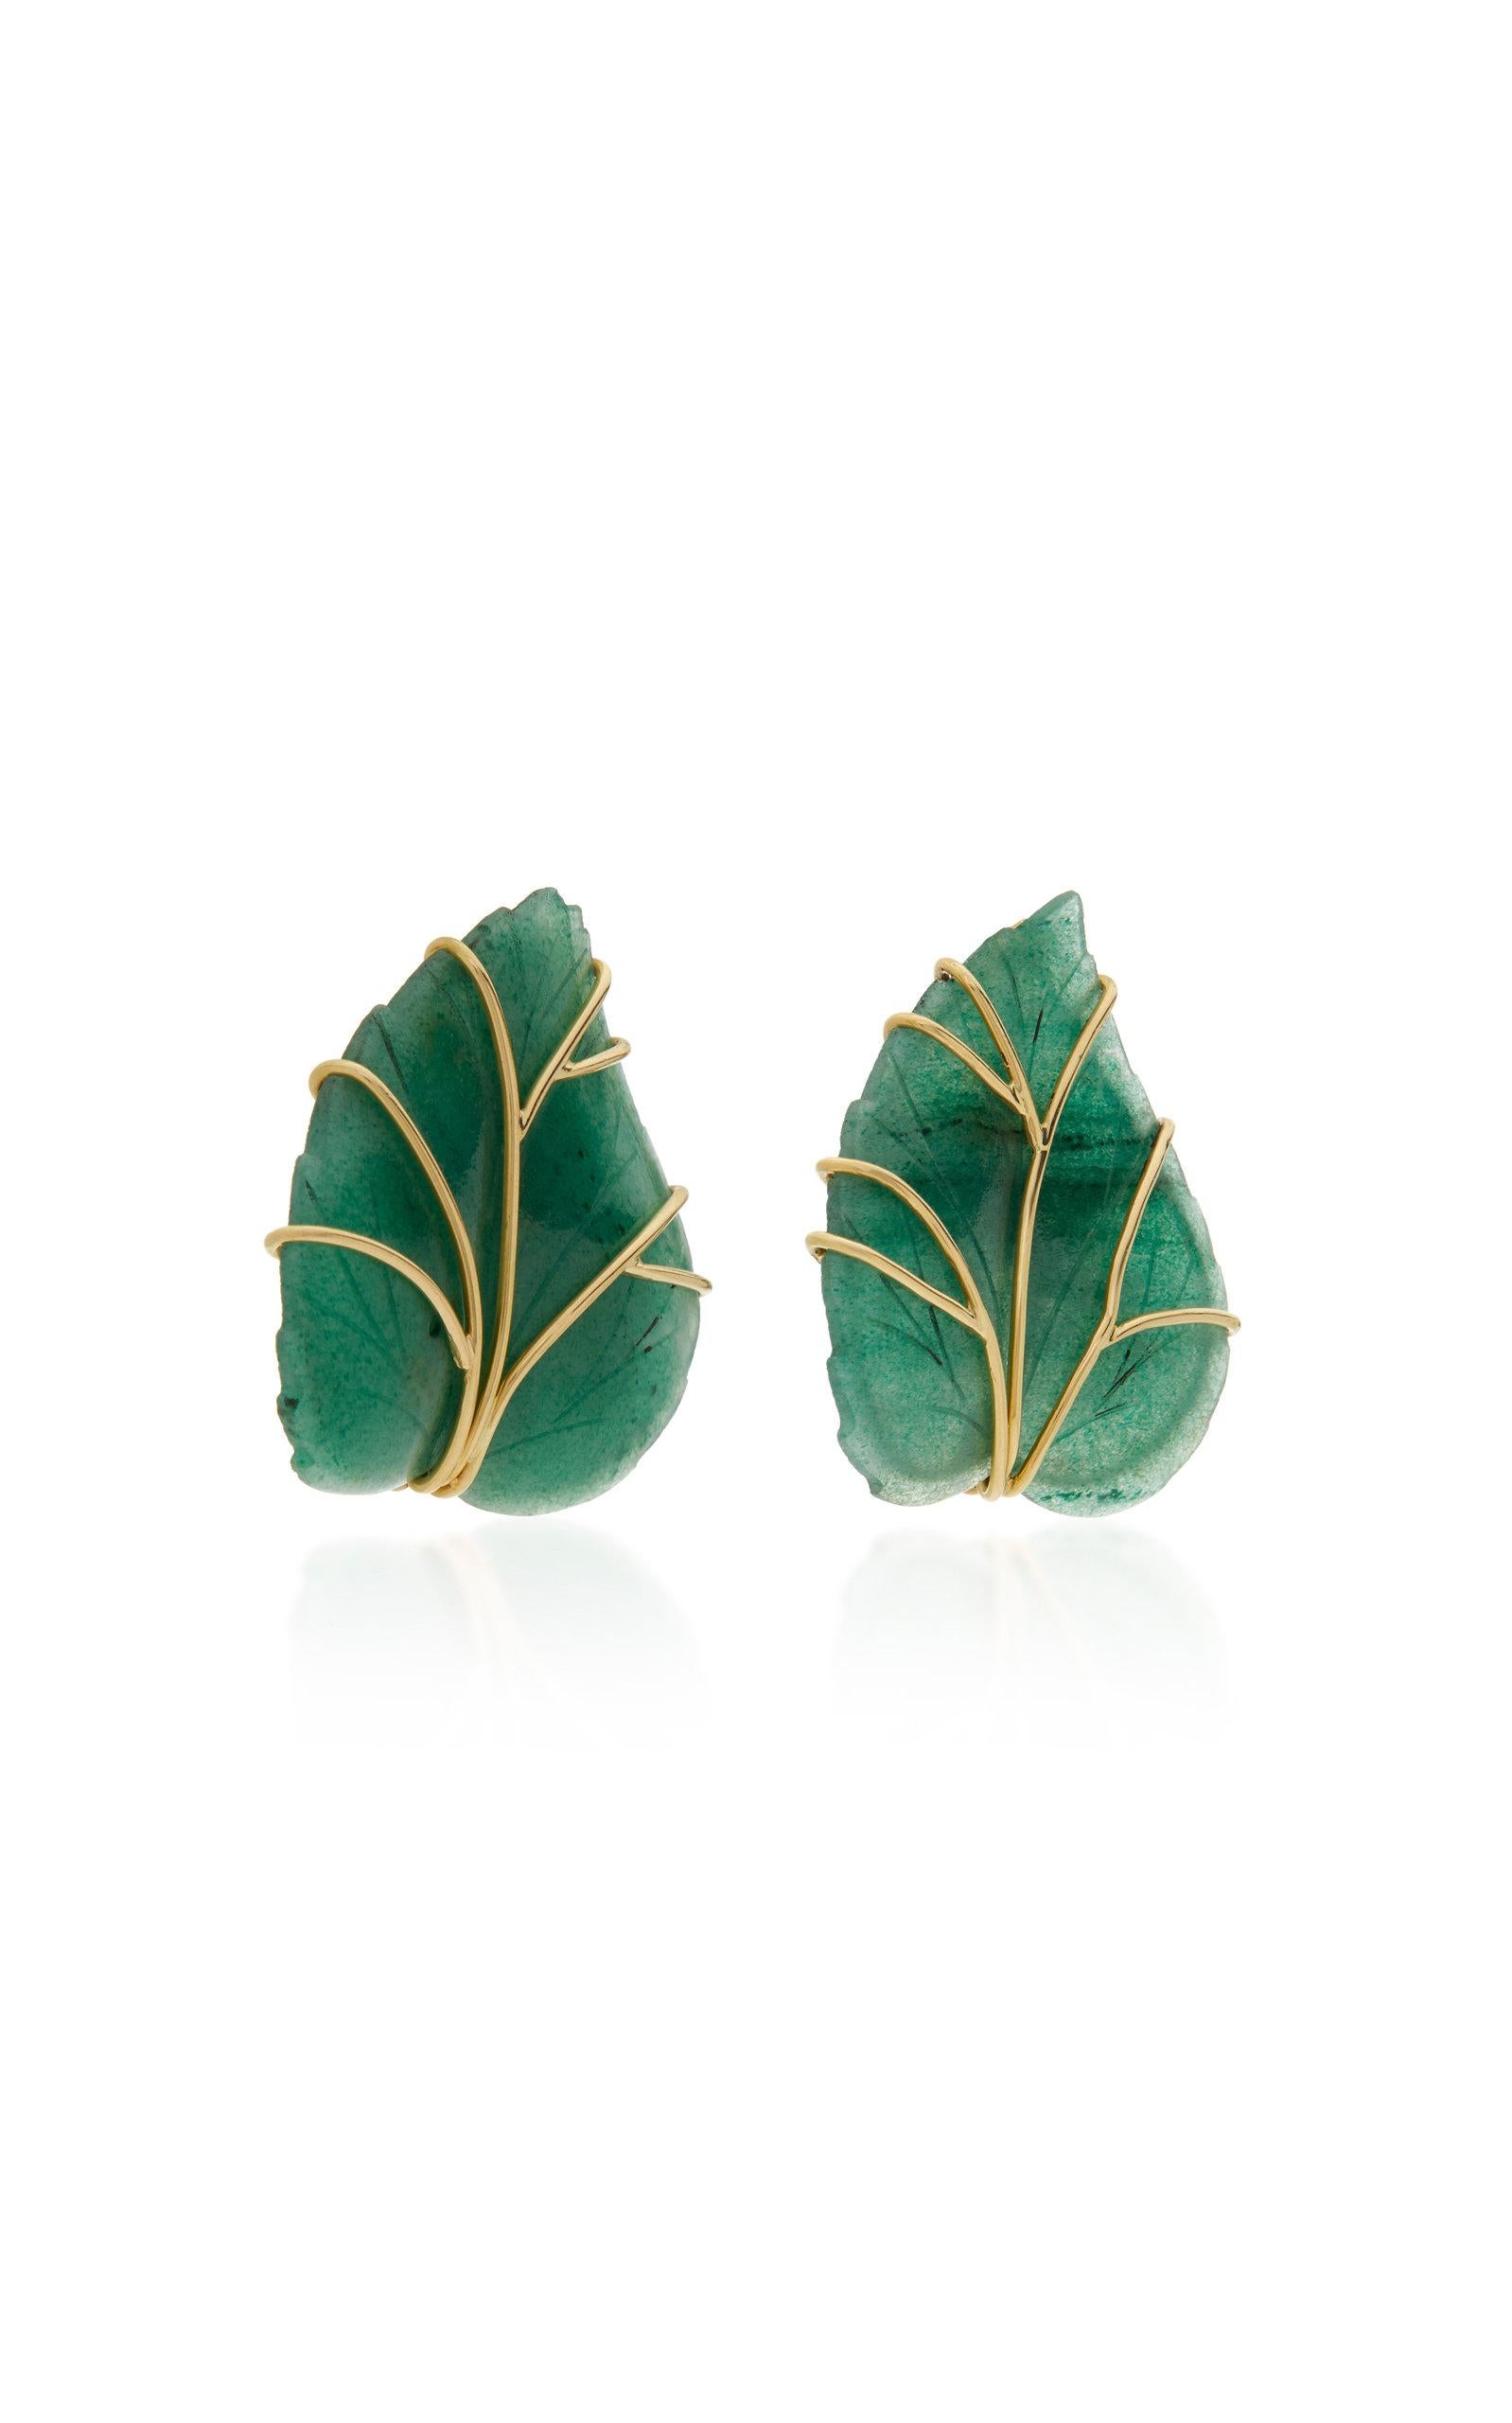 A pair of carved green Aventurine leaf Earrings with 18 karat gold vain and a detachable Amethyst drop with a pave Diamond tab on the corner. Set in 18 karat yellow gold, signed Sorab & Roshi.
Dia= 0.24 cts.  Ameth = 127 cts.

2